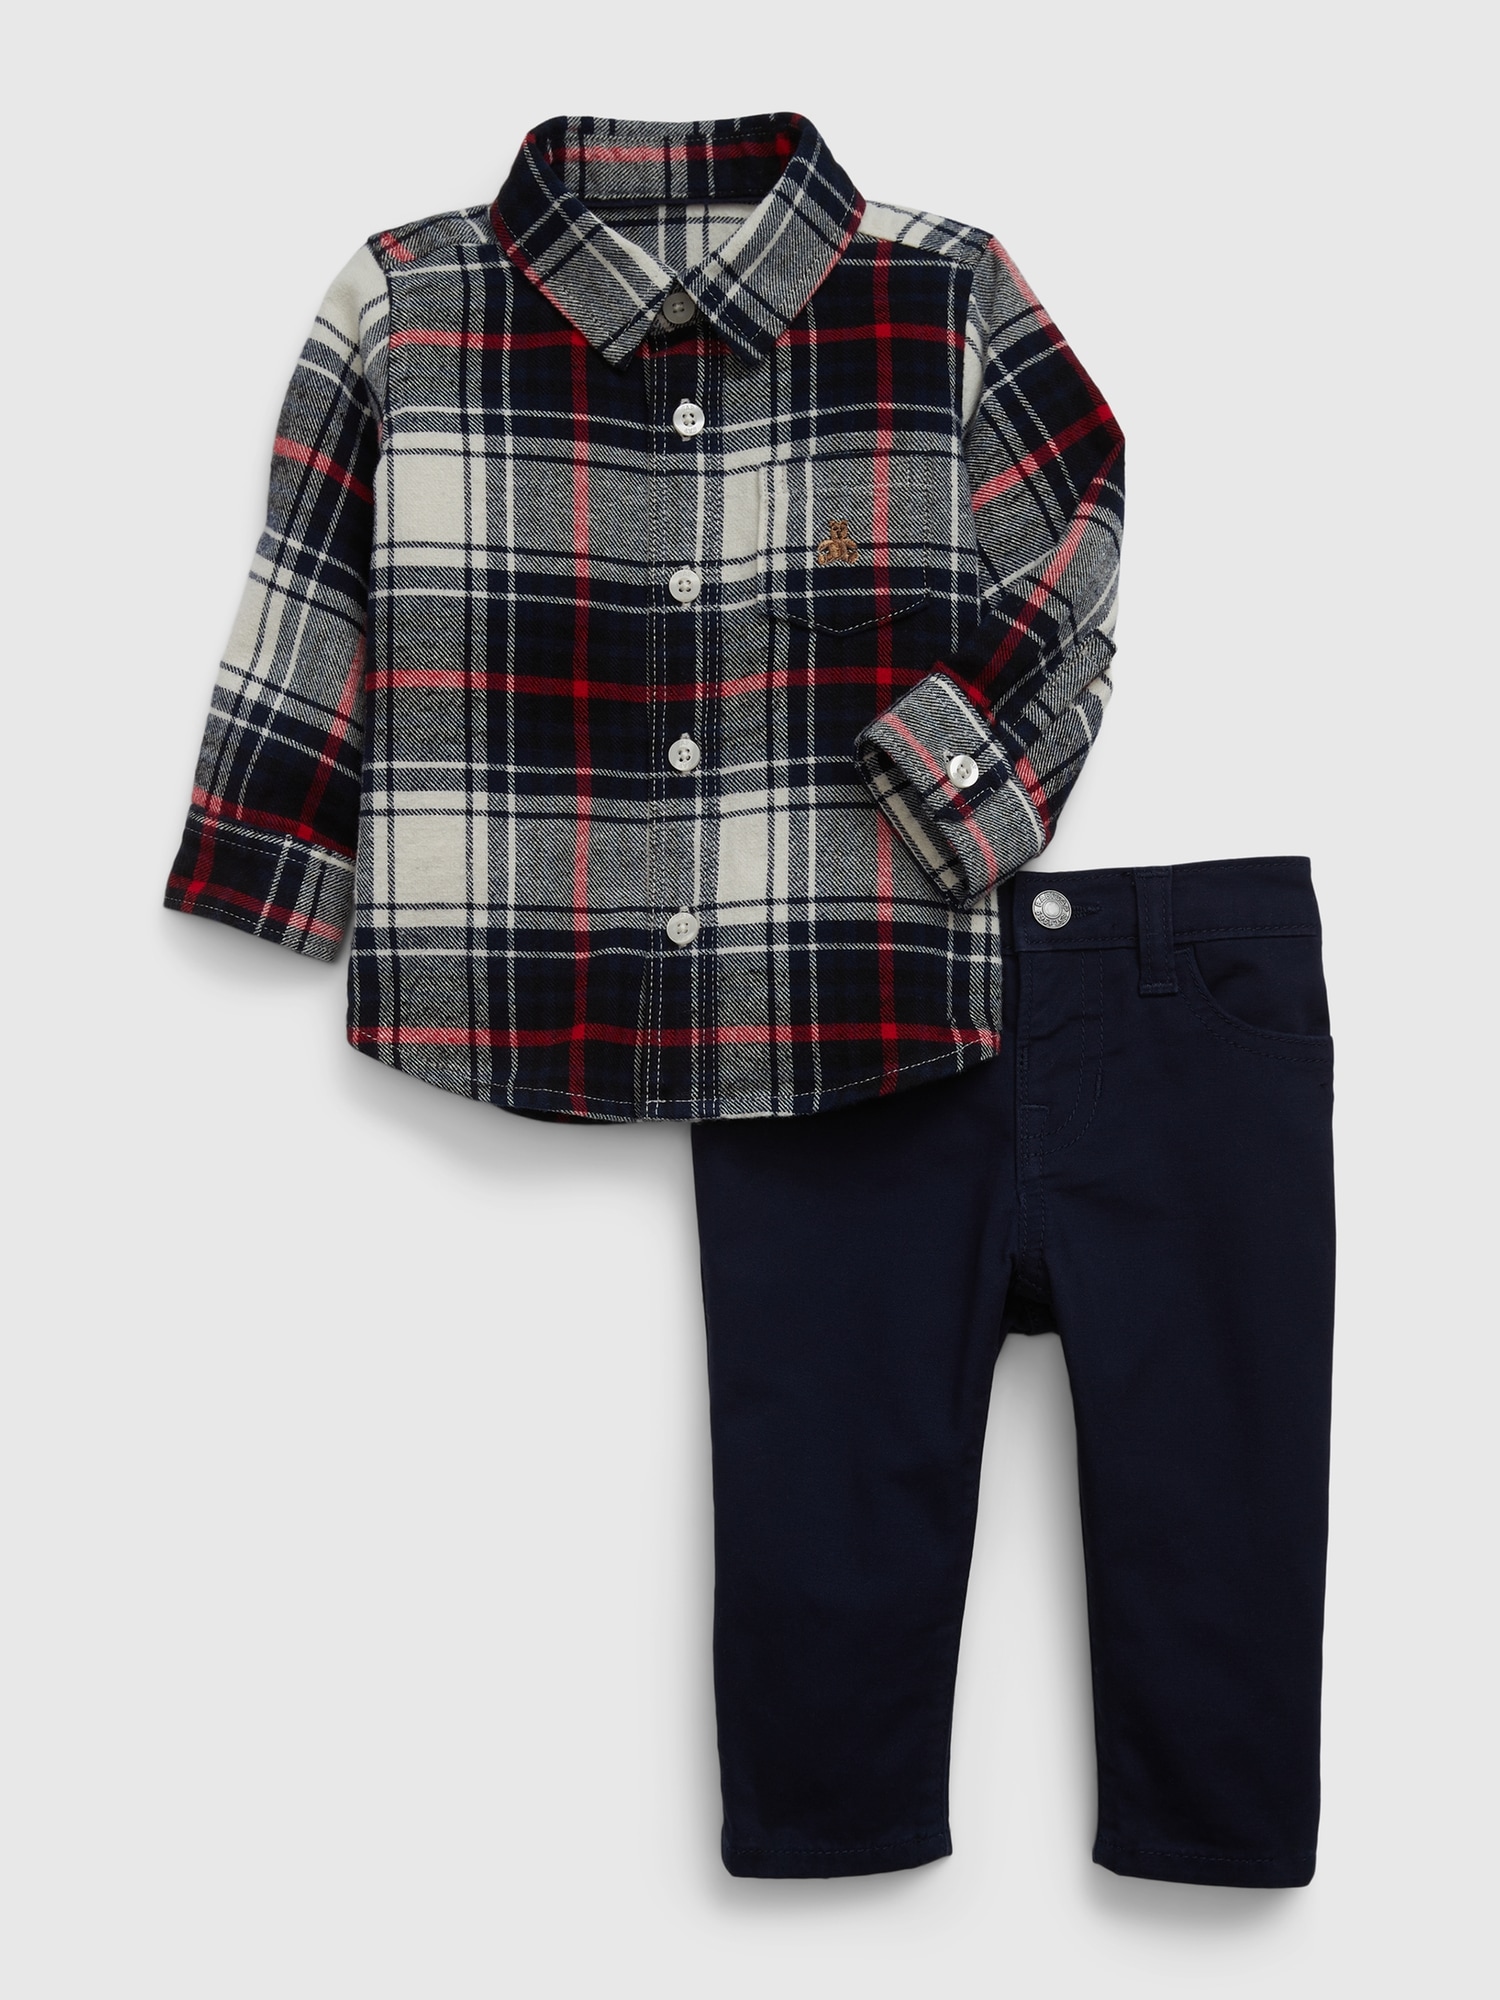 Gap Baby Plaid Outfit Set